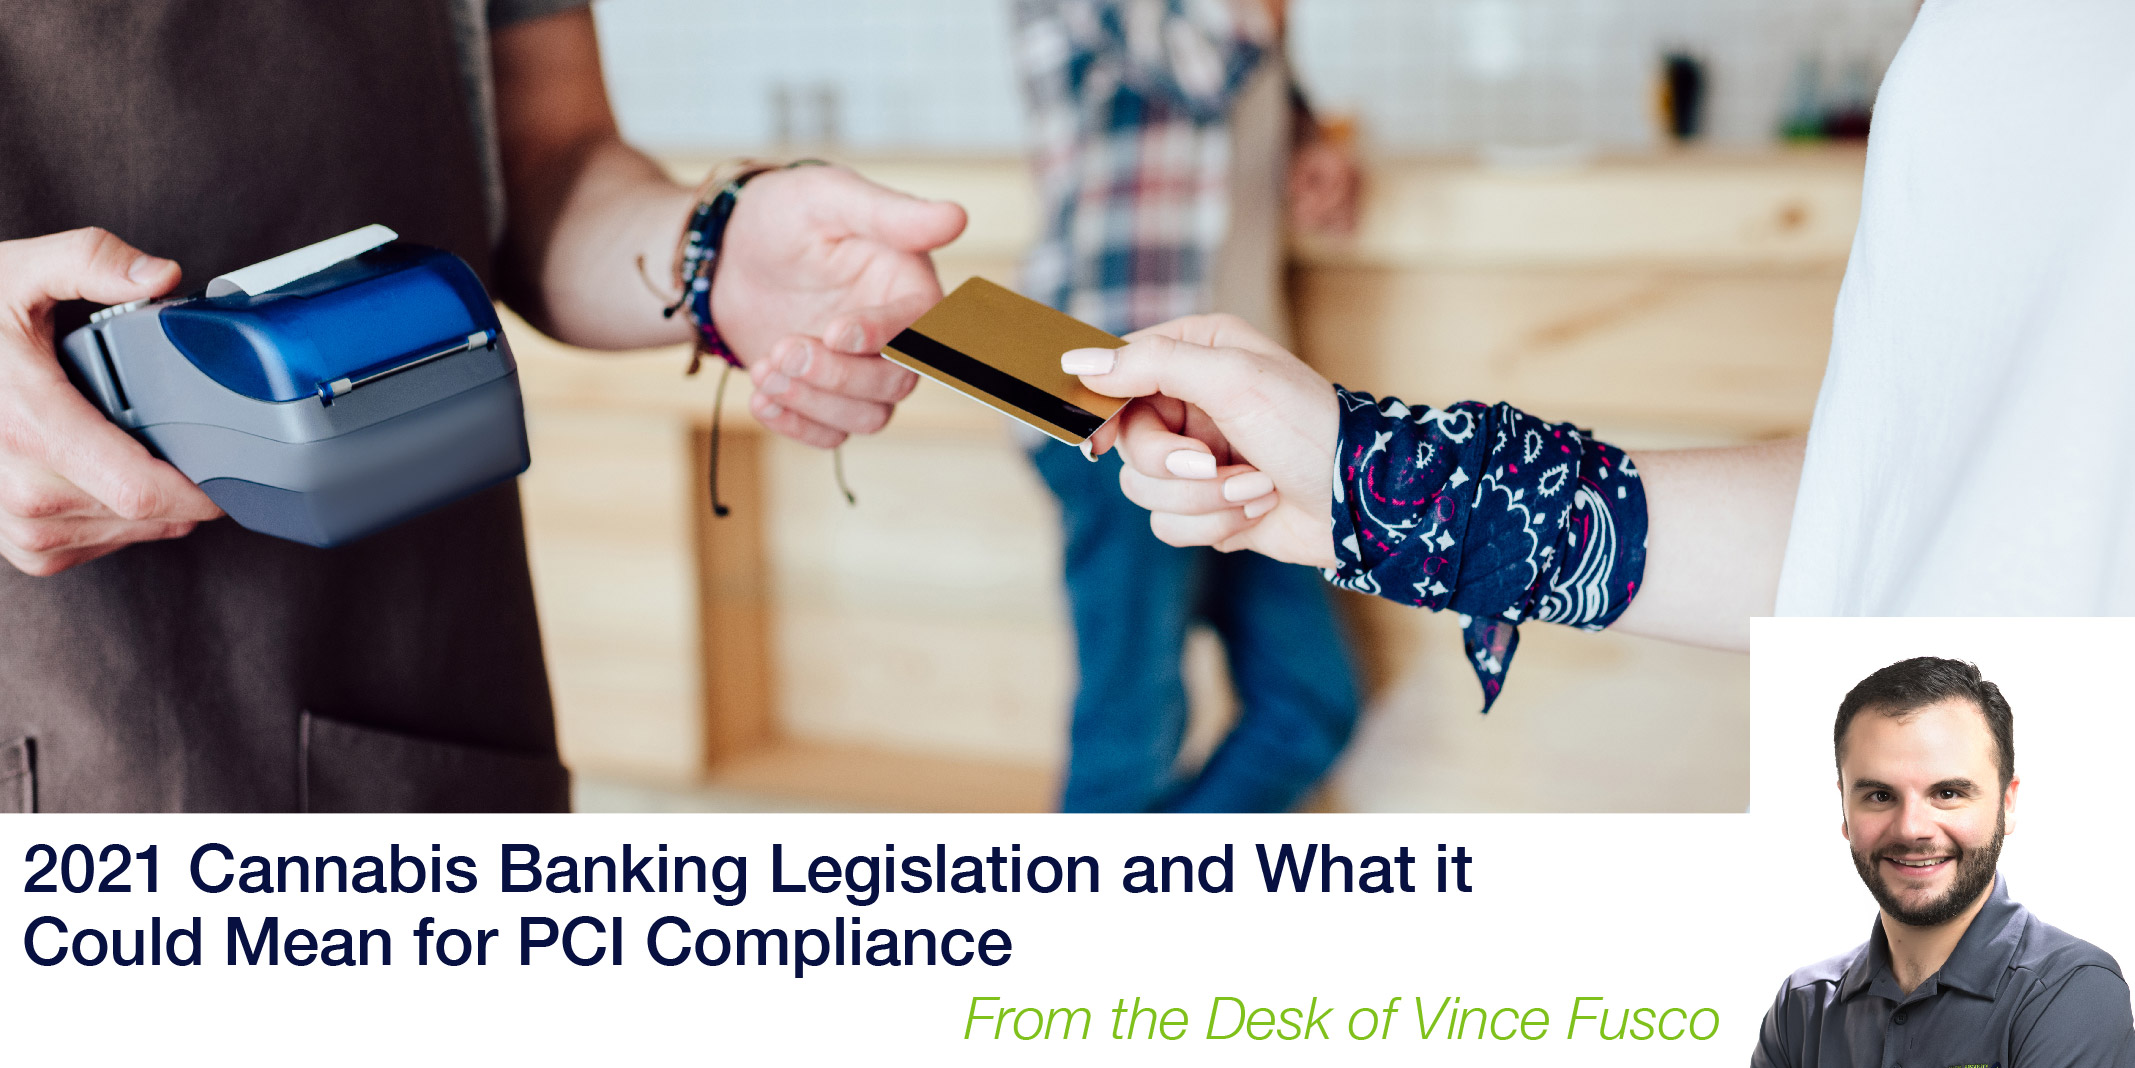 2021 Cannabis Banking Legislation and What it Could Mean for PCI Compliance